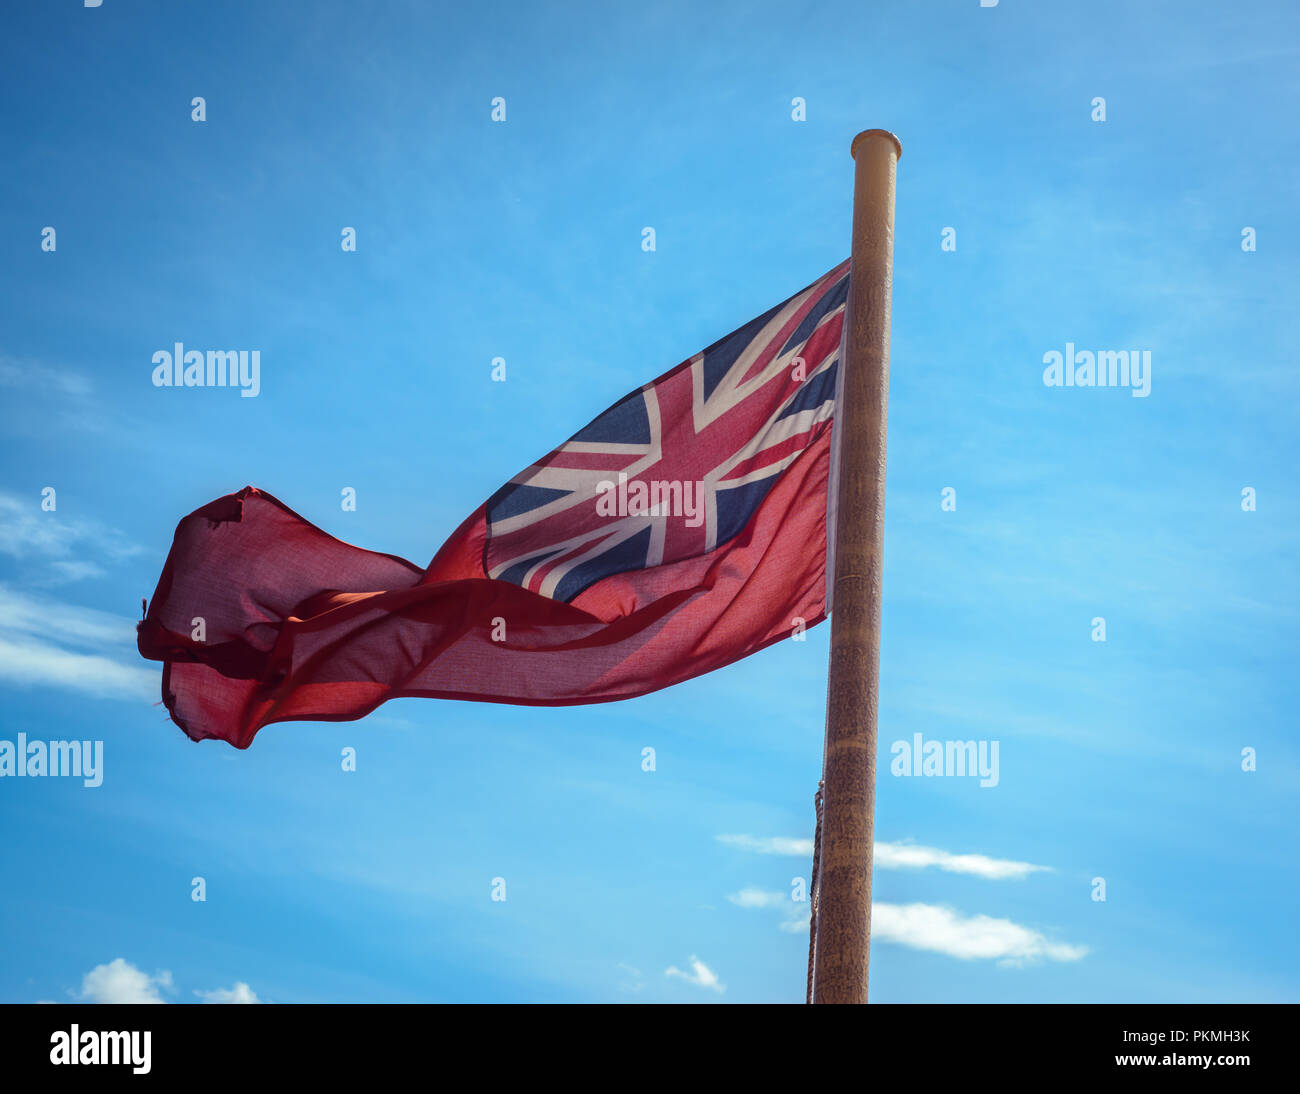 British Red Ensign Flag Against Blue Sky on a Vessel in Scotland, UK Stock Photo